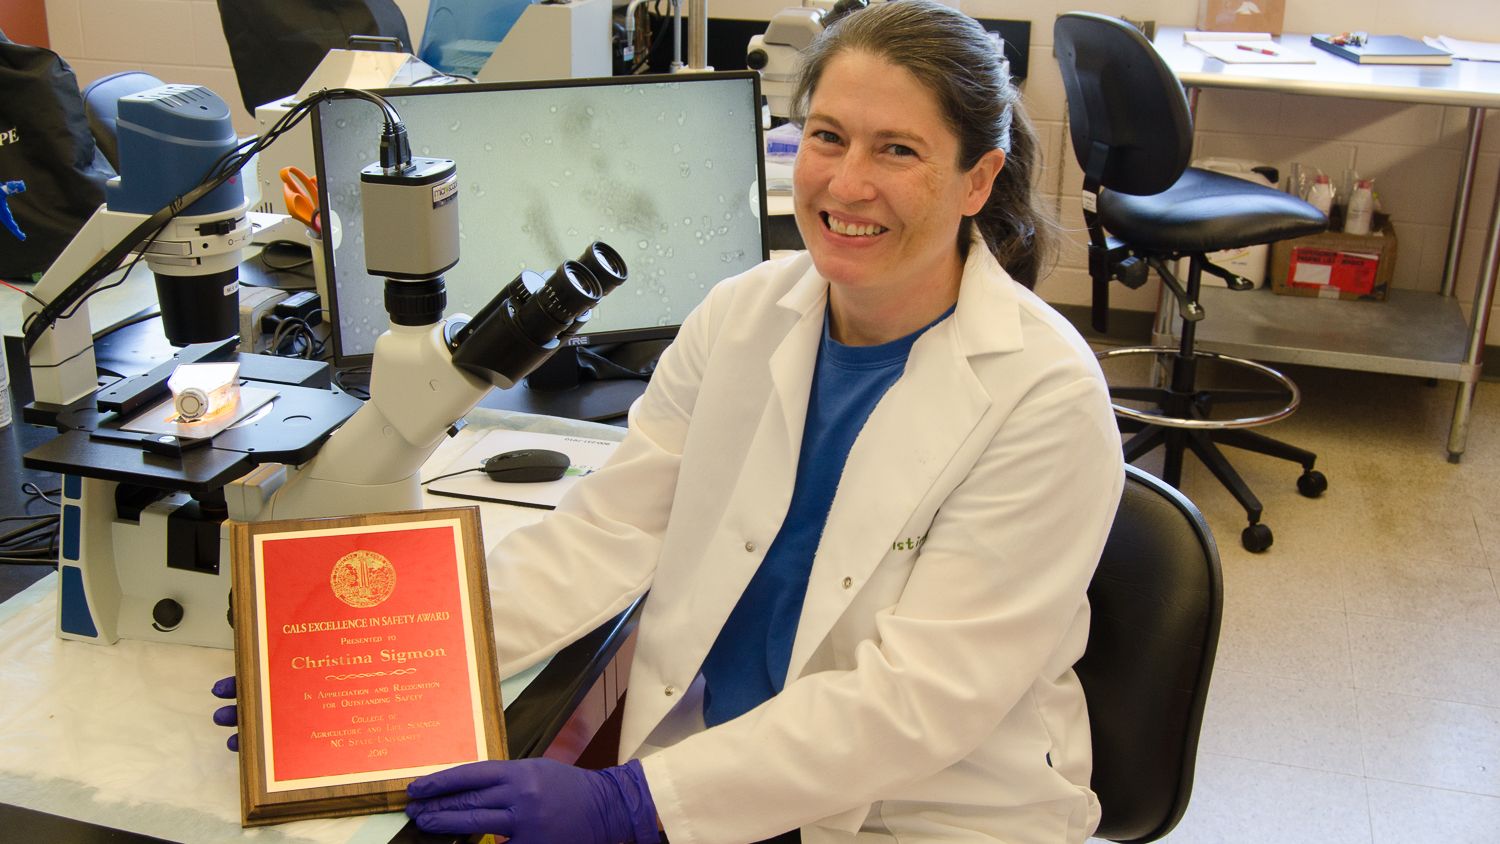 Christina Sigmon in her lab with her safety award plaque